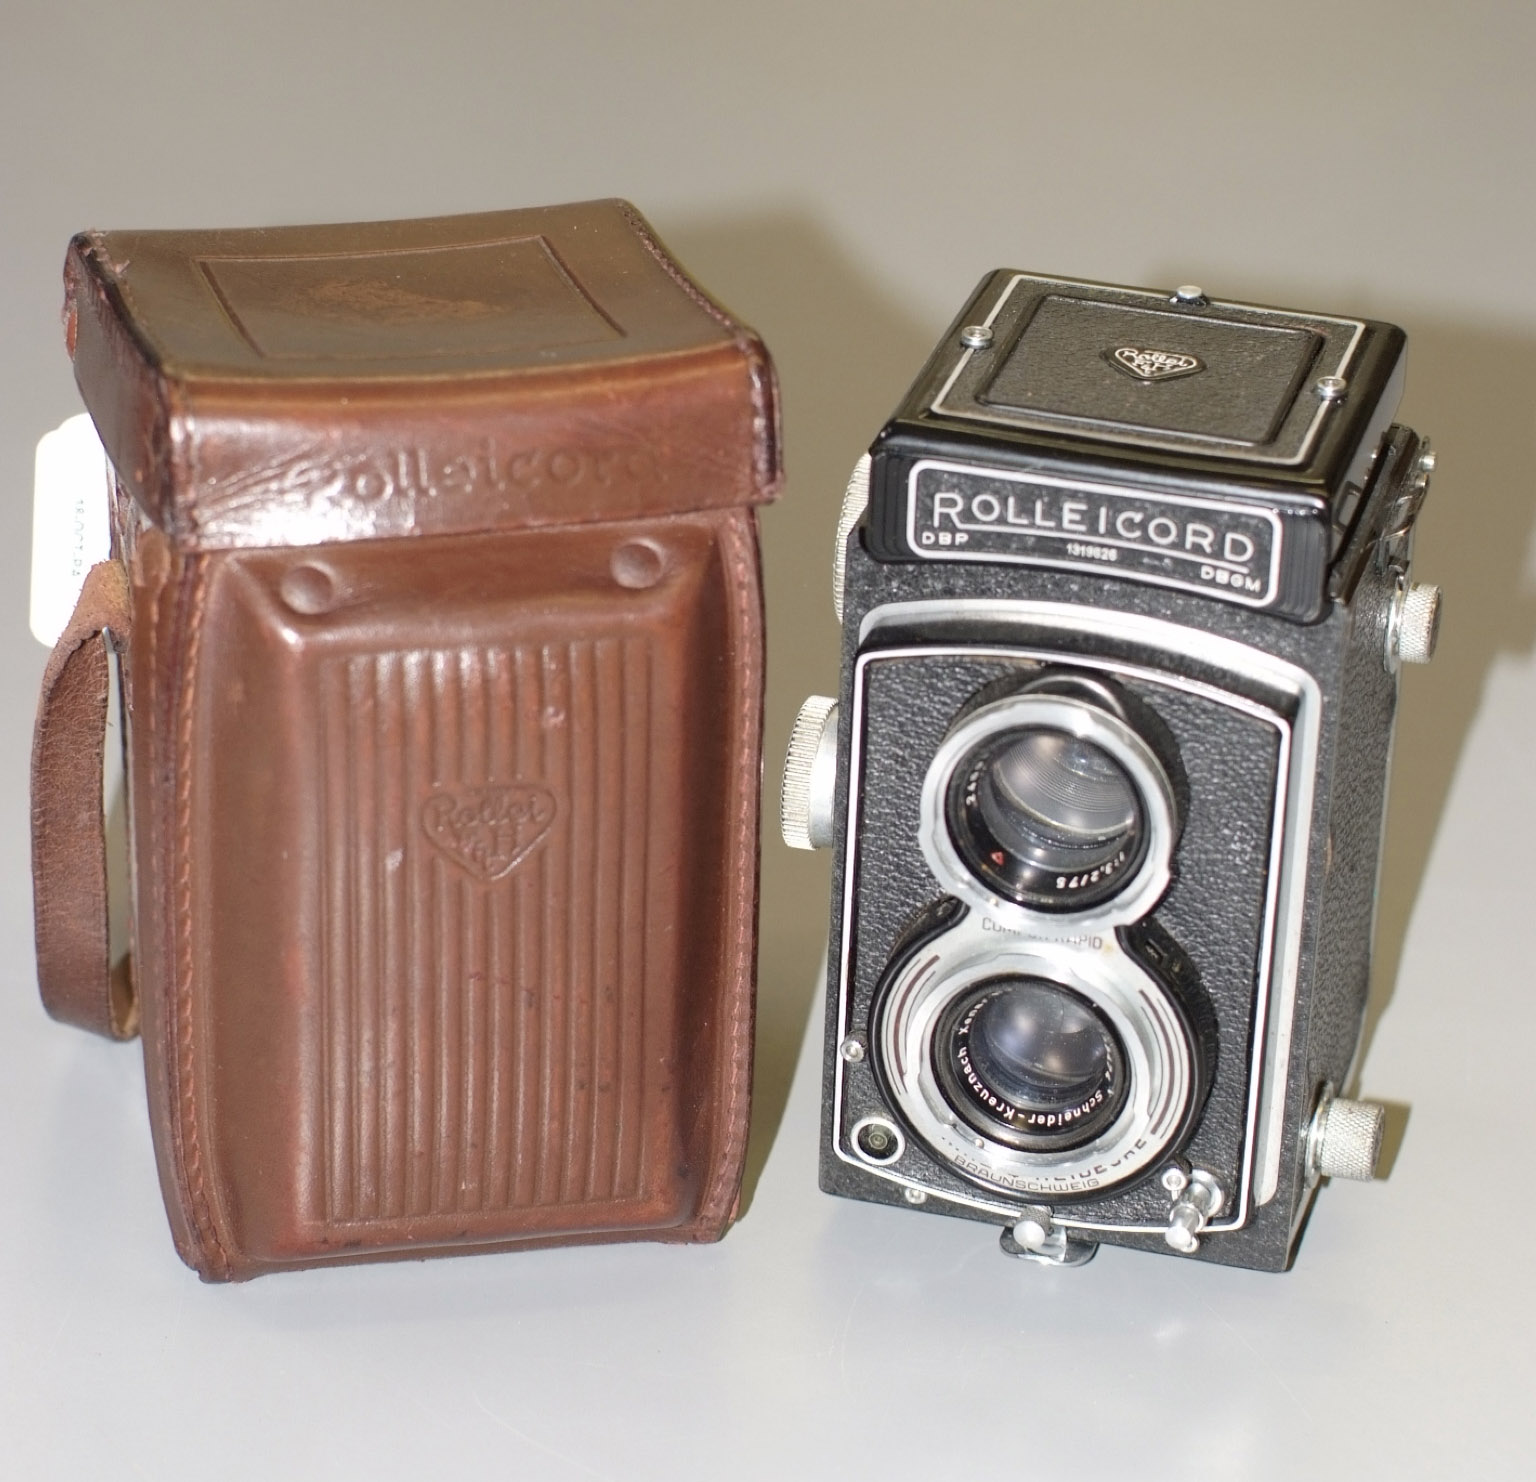 Rolleicord III TLR #1319626. Condition 5F. With Xenar 75mm f3.5 lens, in maker's case.